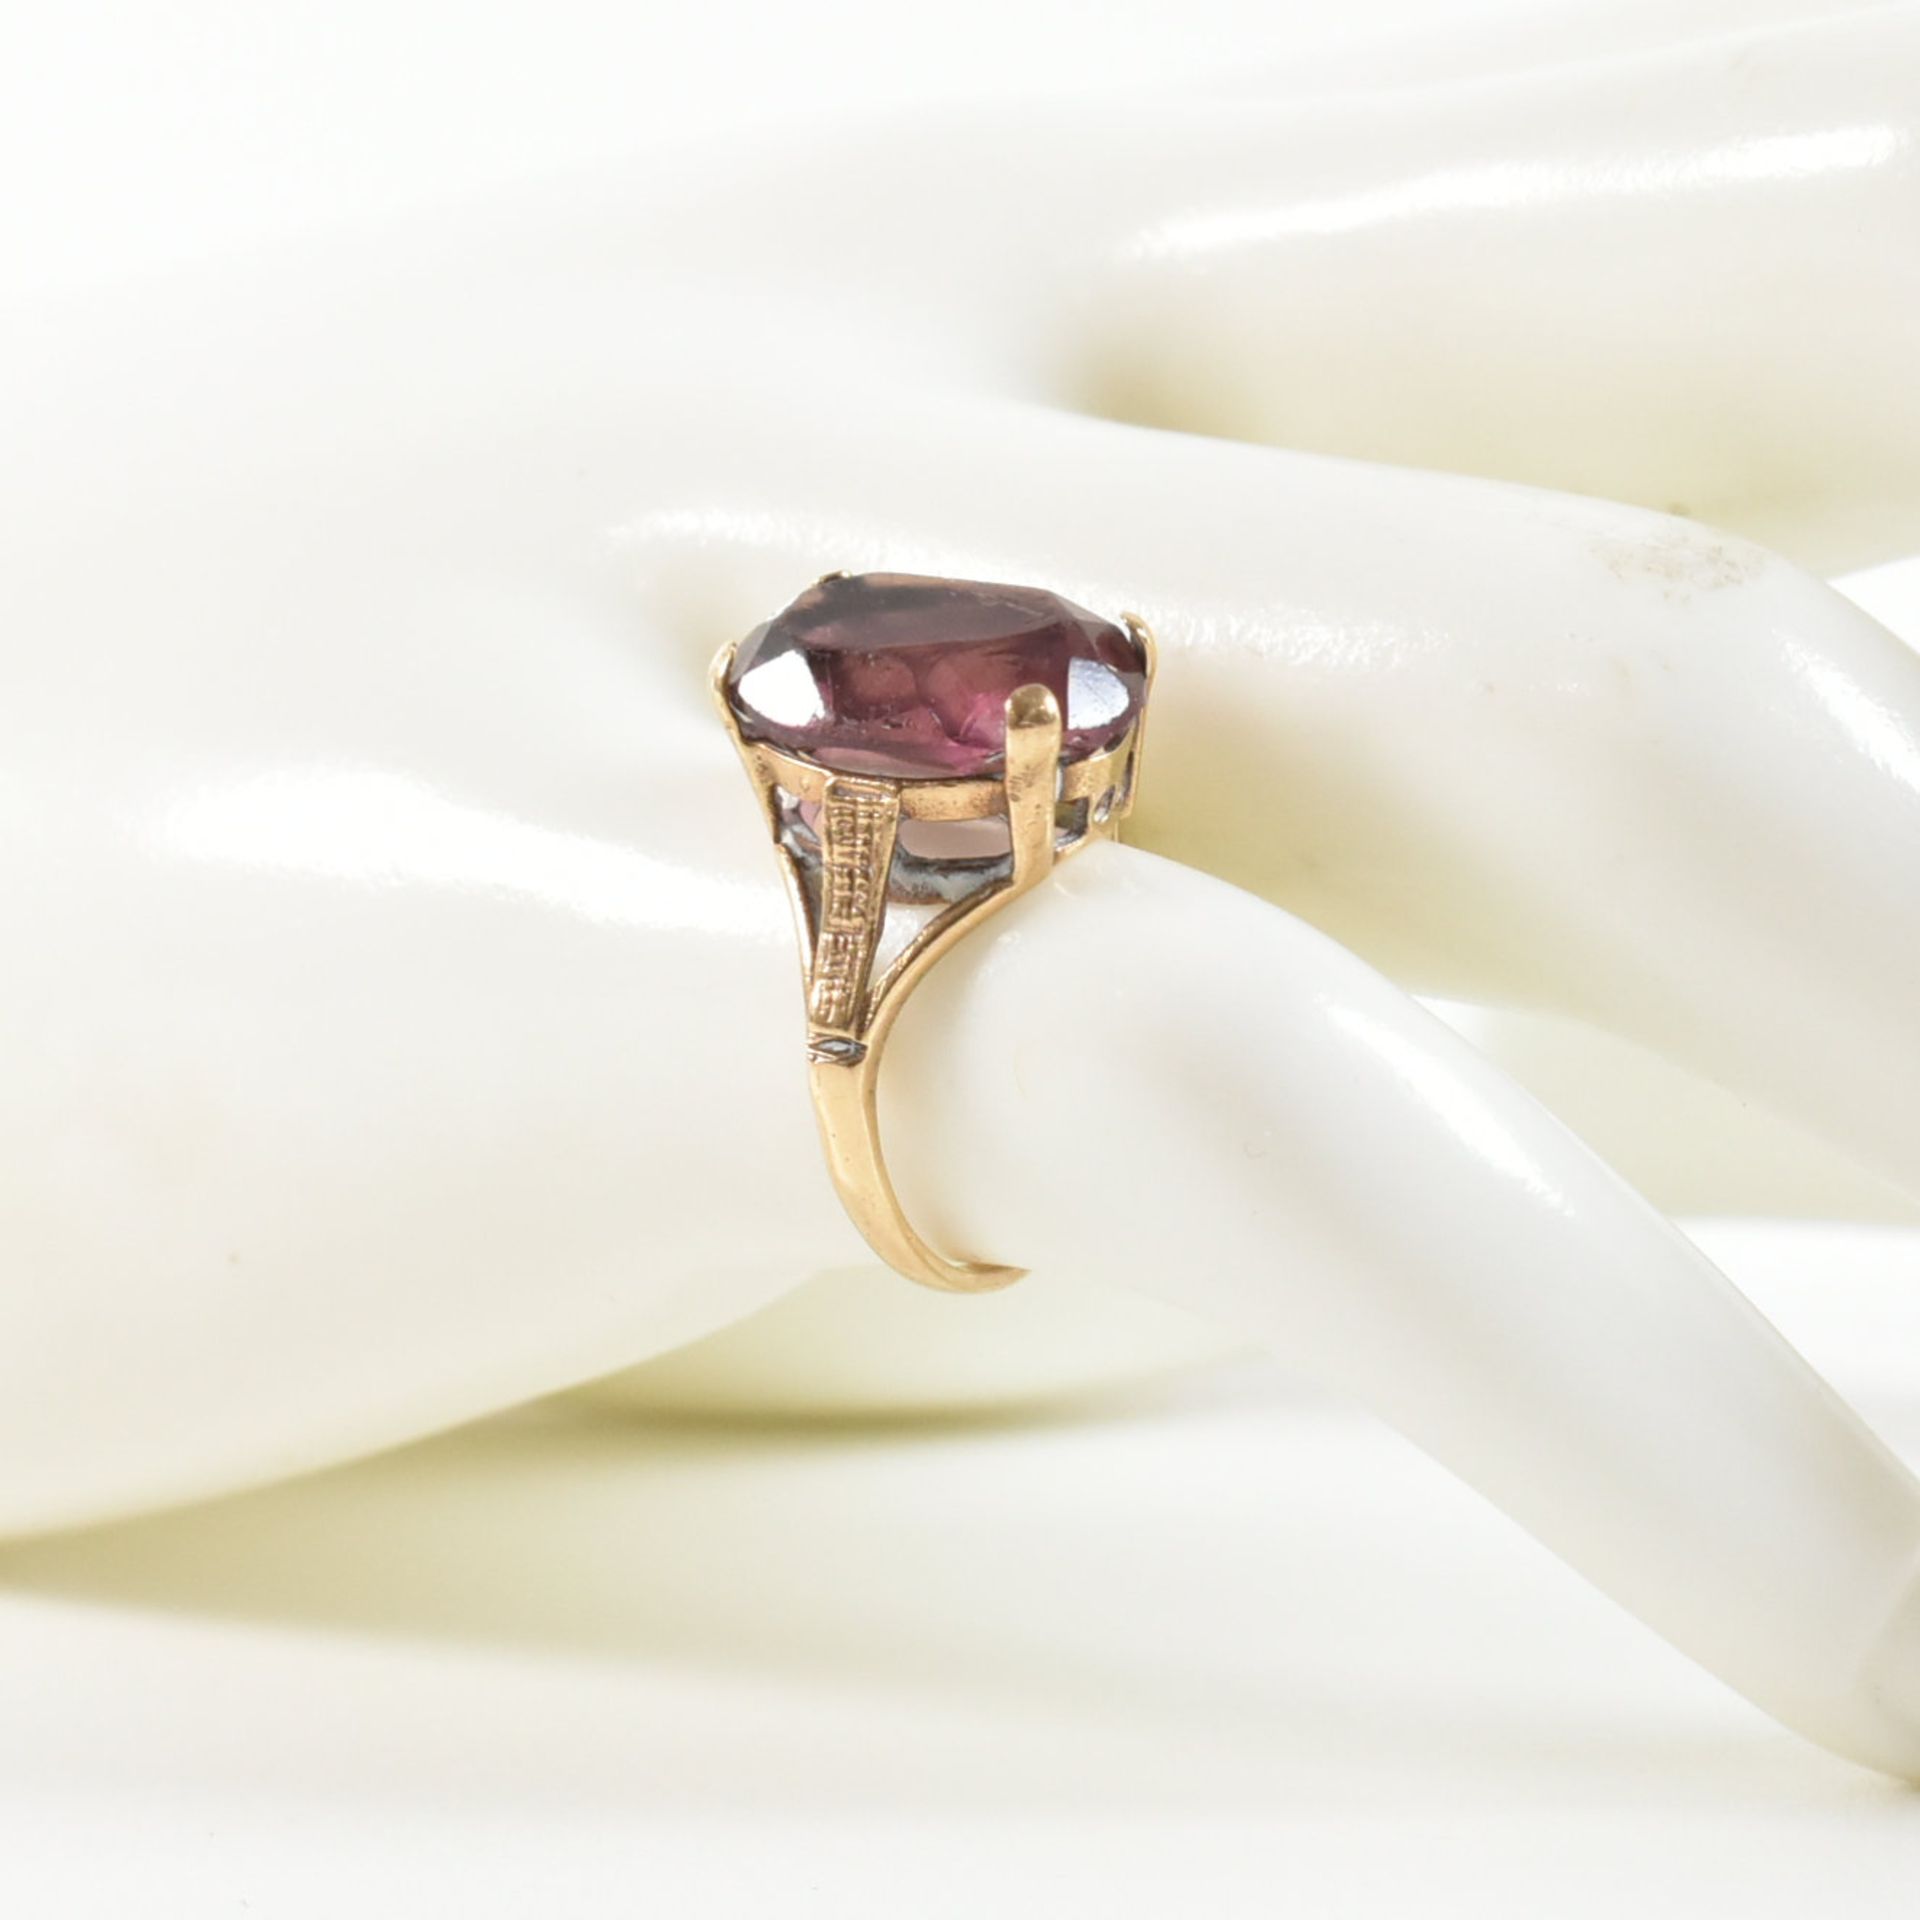 VINTAGE 9CT GOLD & PURPLE STONE RING - Image 9 of 9